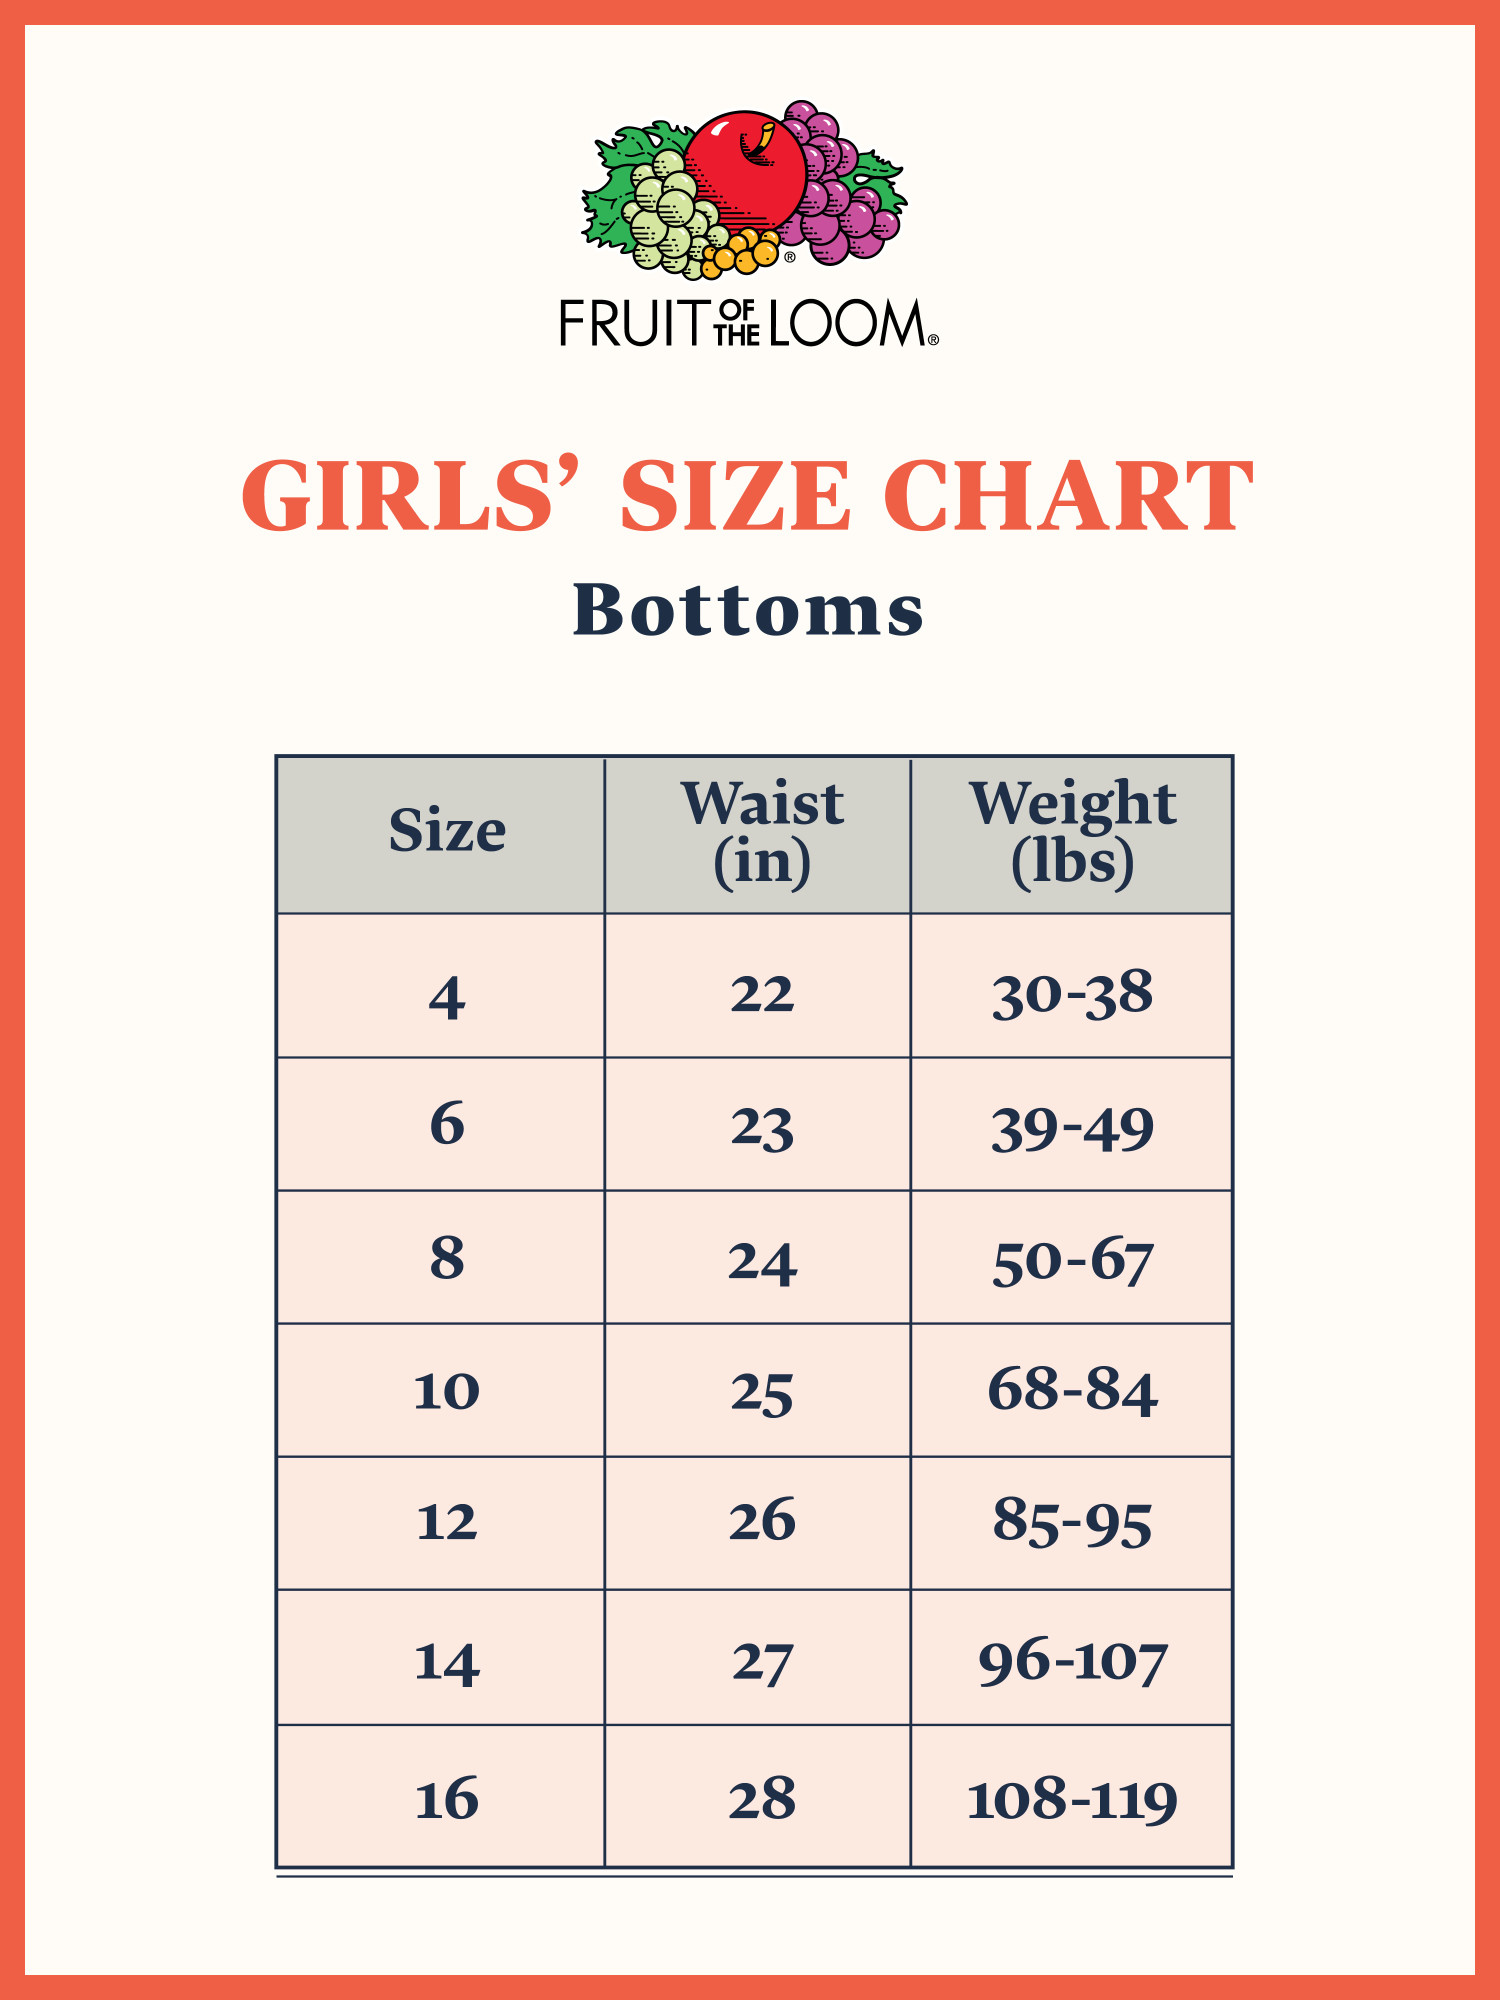 Fruit of the Loom Girls' Cotton Hipster Underwear, 14 Pack - image 3 of 4